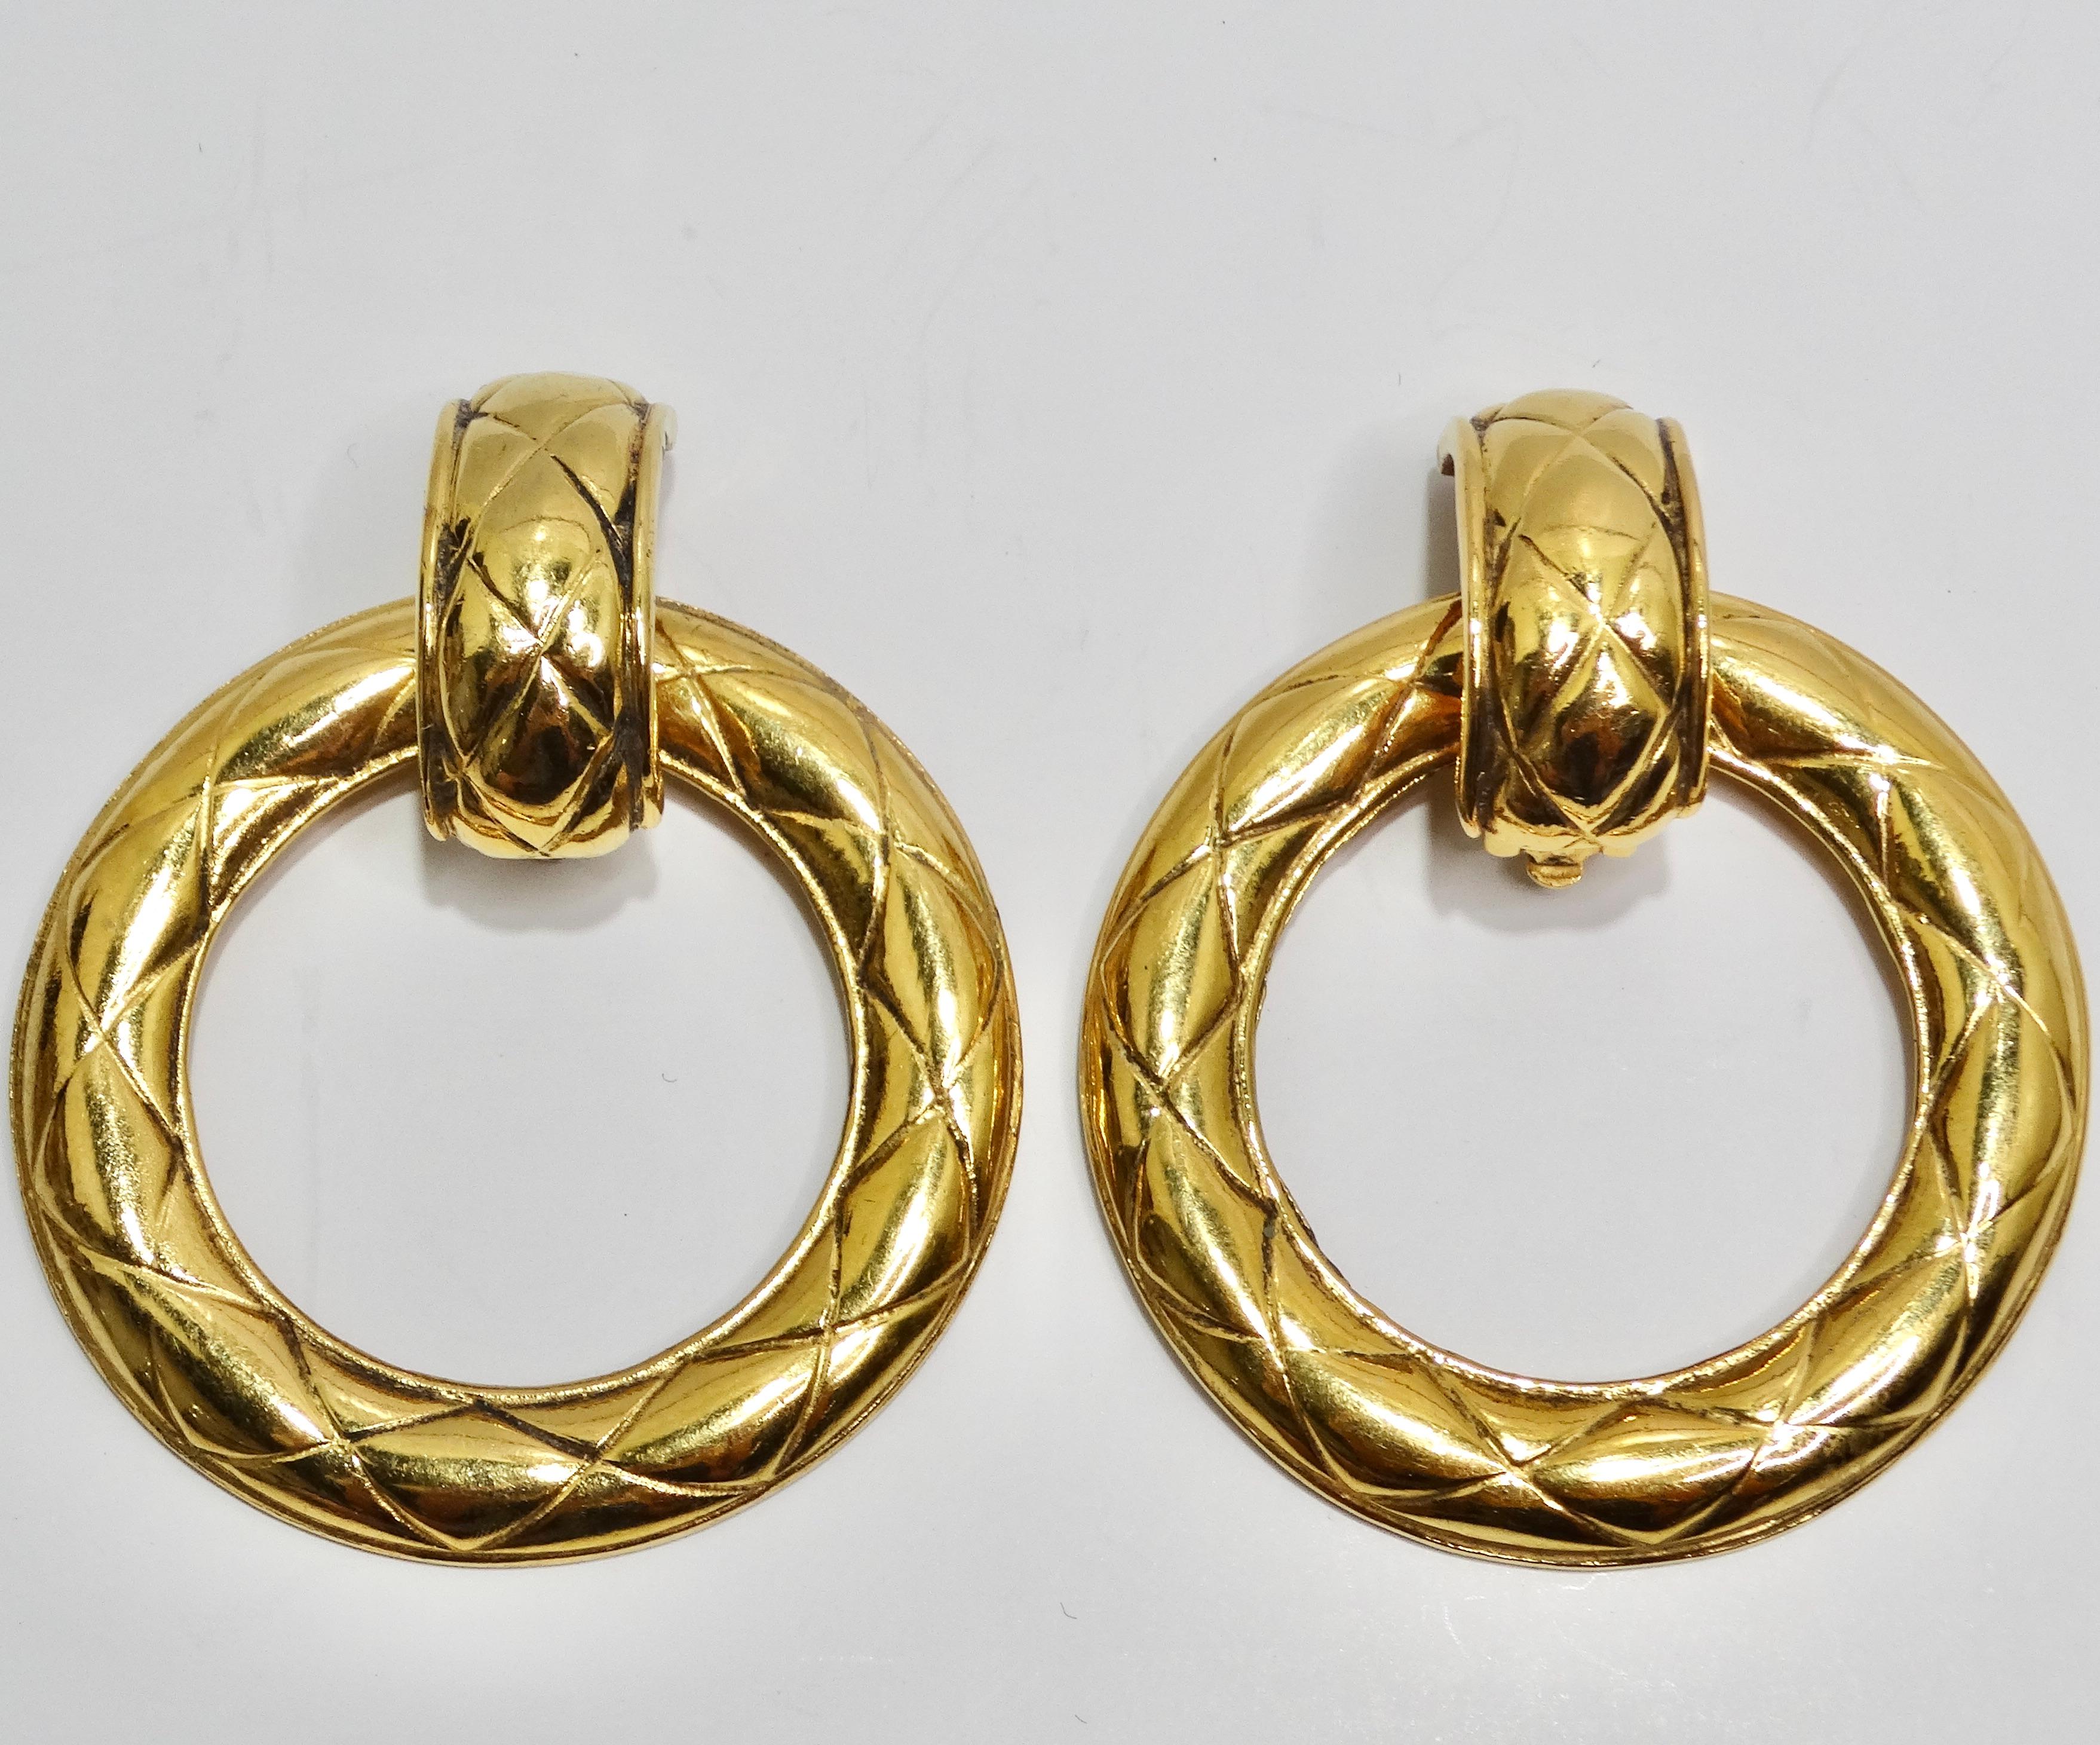 Indulge in the timeless elegance of Chanel with these exquisite Chanel 1980s Gold Tone Quilted Hoop Earrings. These statement earrings are a true testament to the iconic Chanel style, featuring a luxurious gold-tone finish and the signature quilted